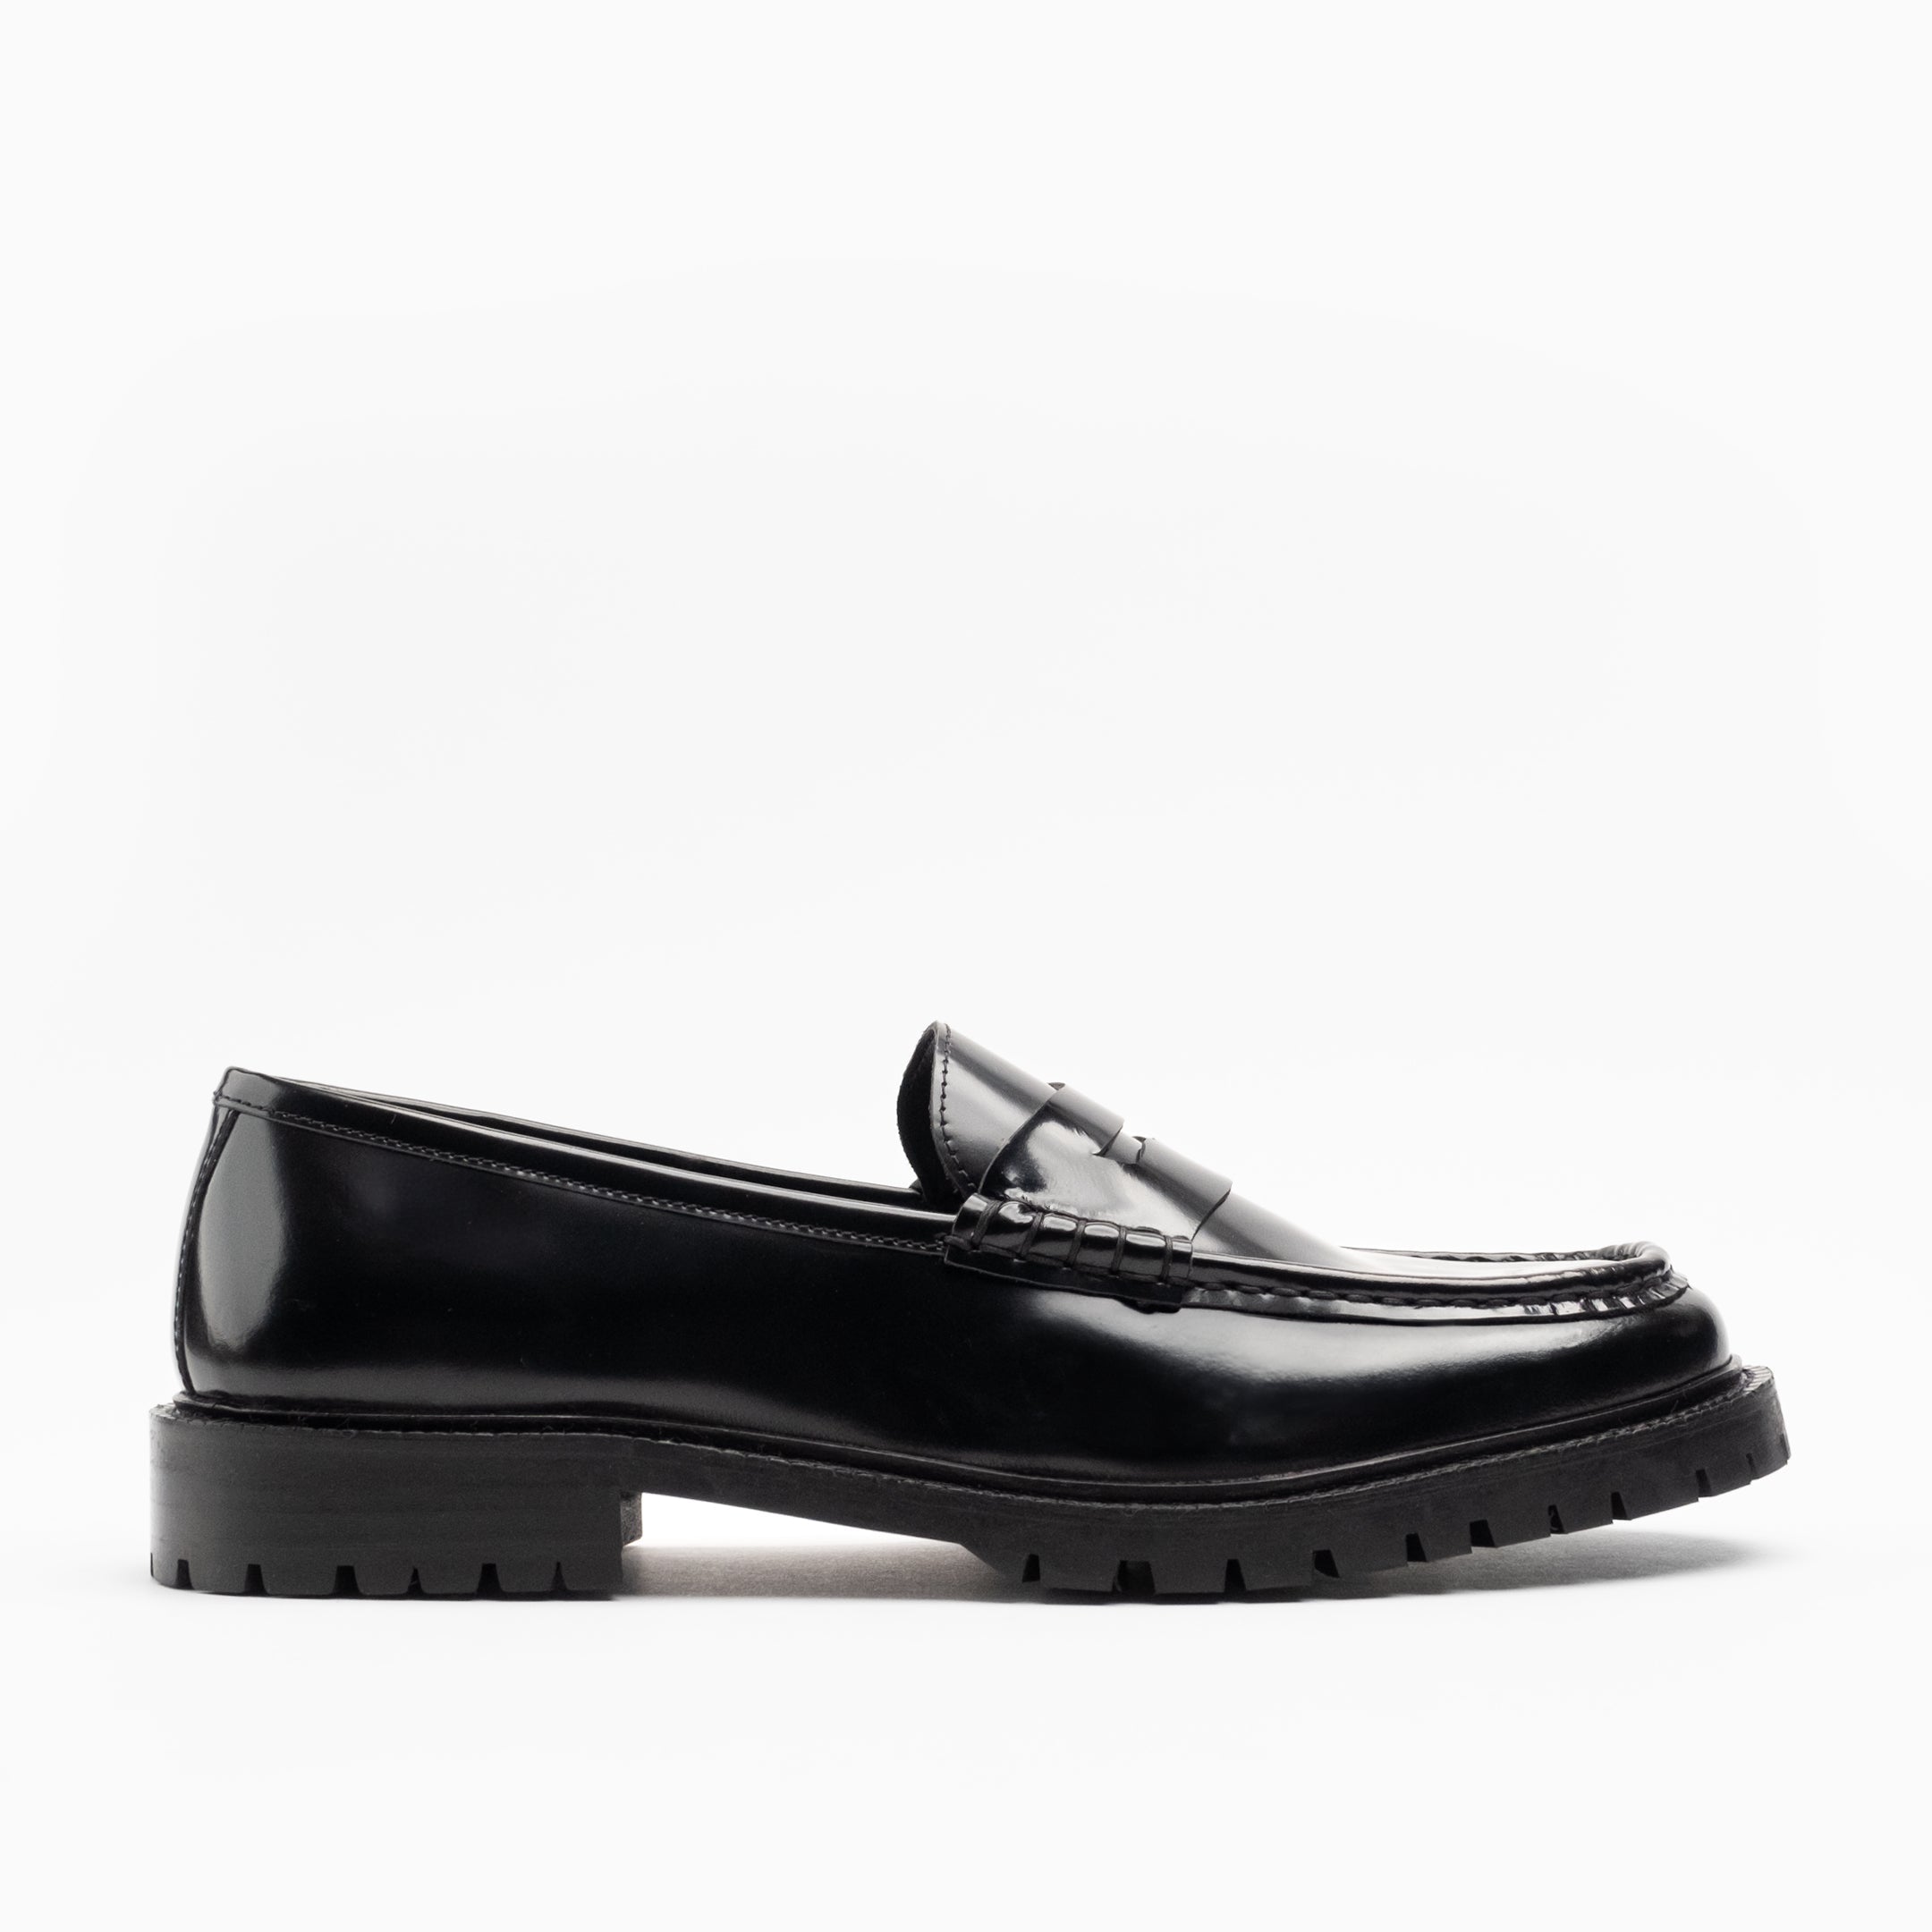 Walk London Mens Campus Saddle Loafer in Smooth Black Leather